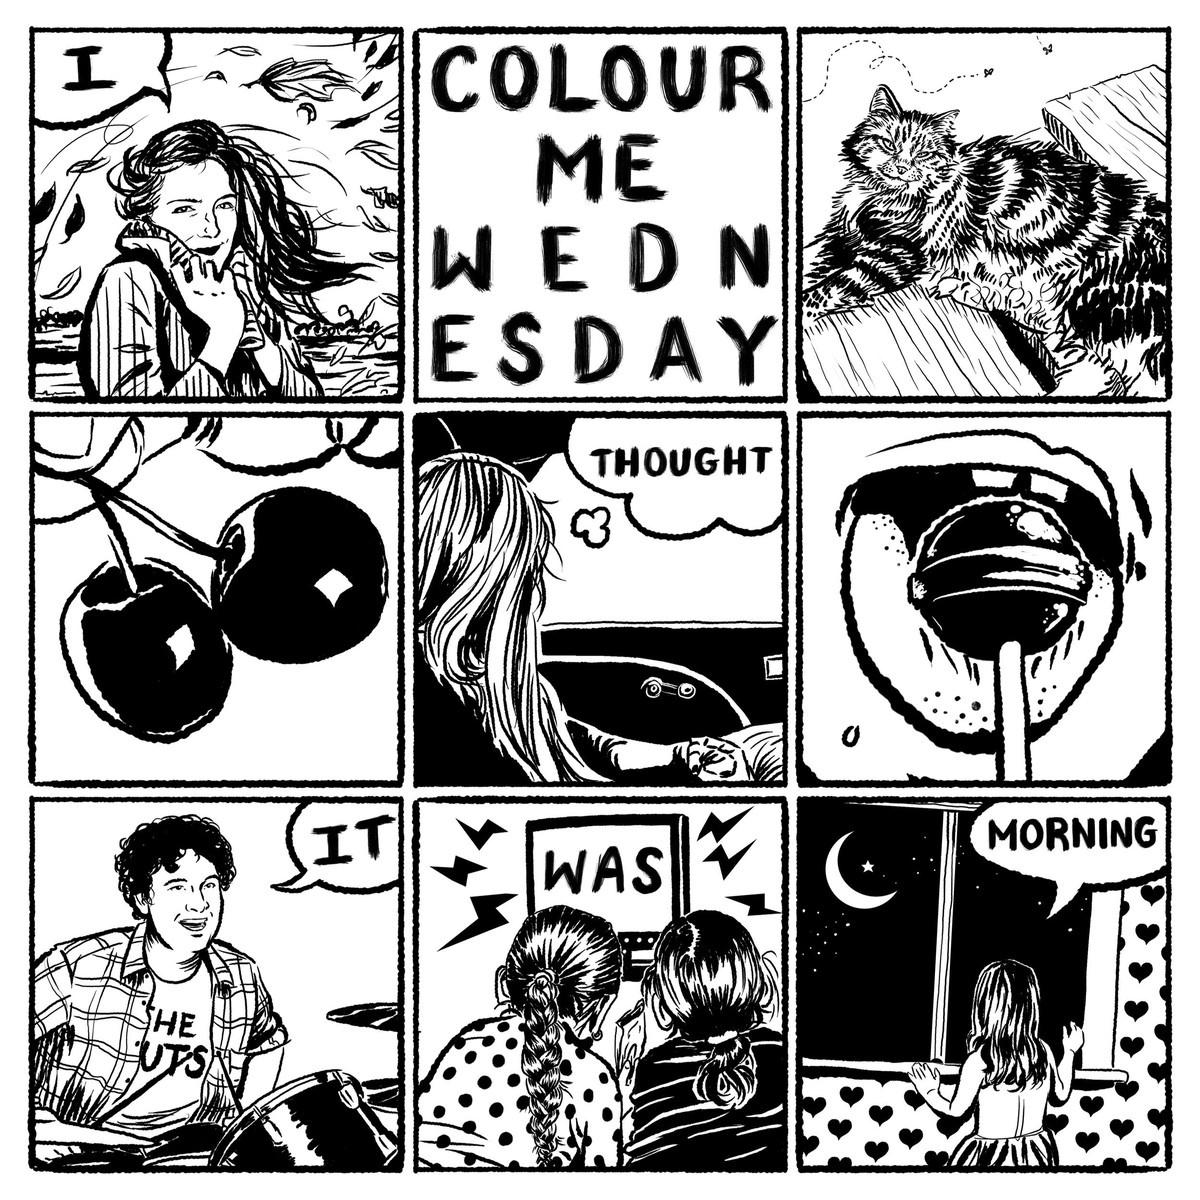 Colour Me Wednesday - Don't Waste Your Breath